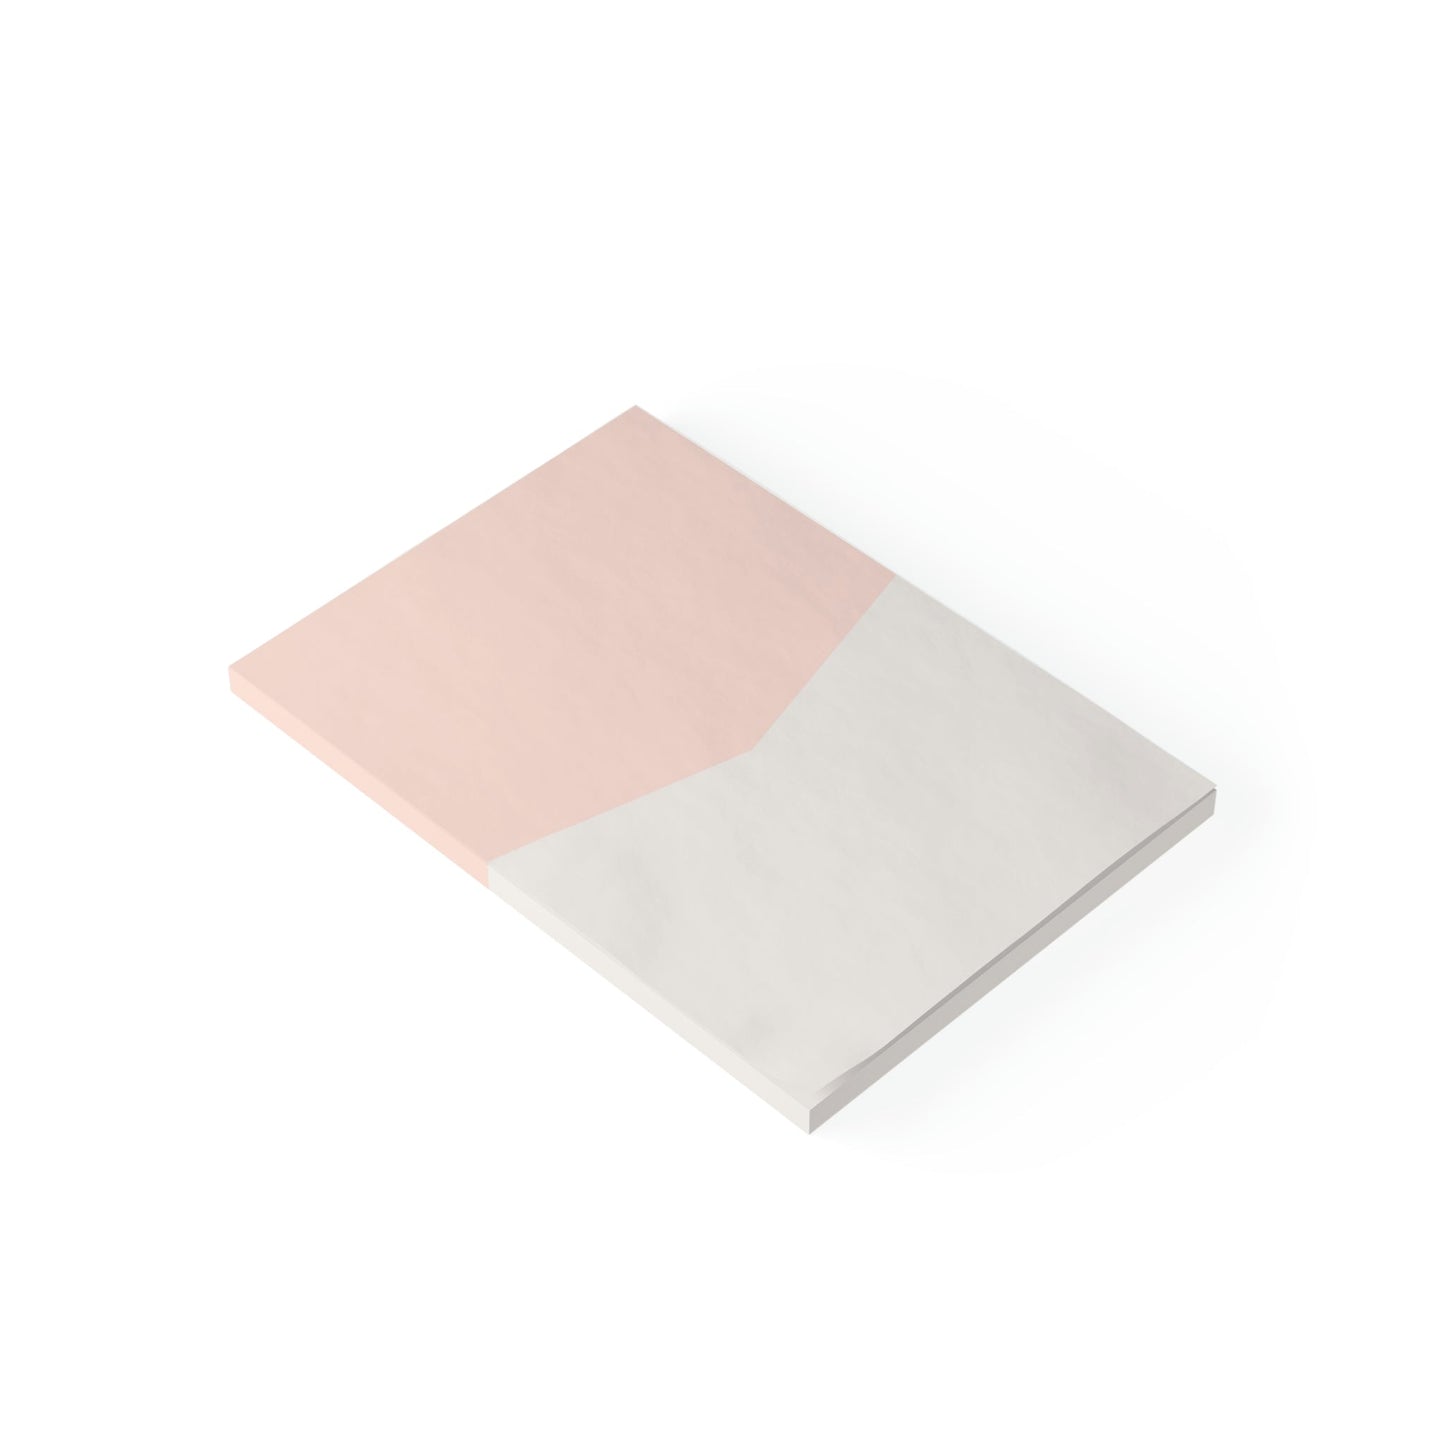 Beige Duo Post-it® Note Pad Paper products Pink Sweetheart